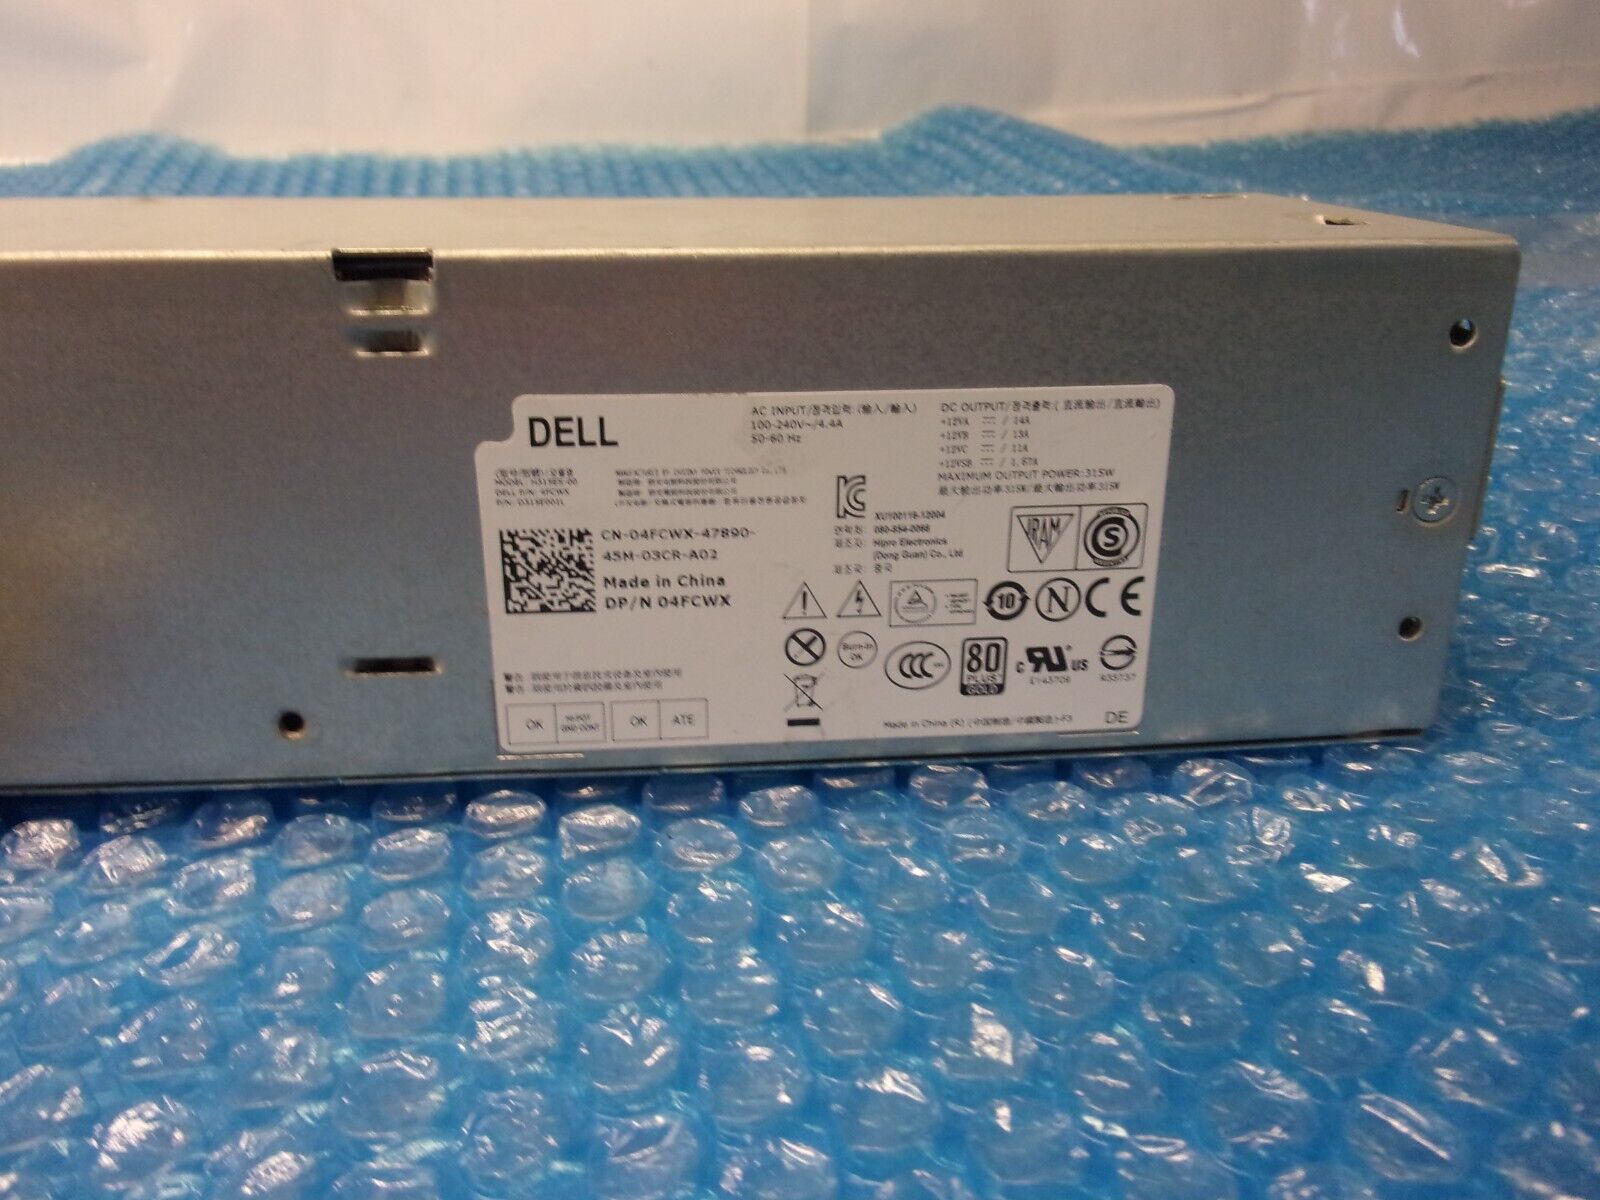 Dell H315ES-00 Switching Power Supply D/P 04FCWX from Dell Optiplex XE2